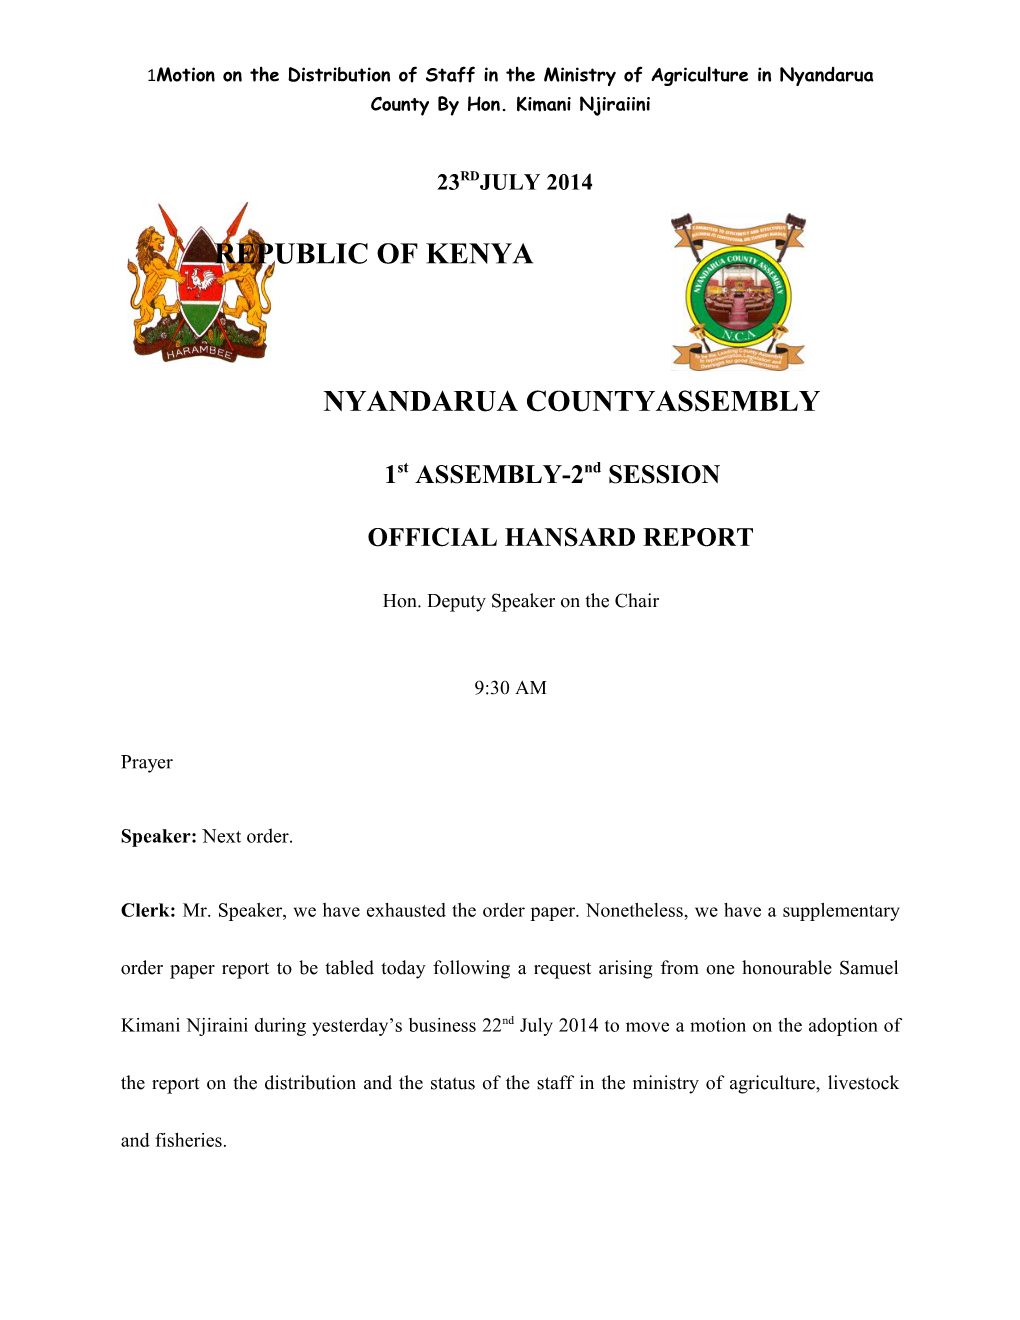 Motion on the Distribution of Staff in the Ministry of Agriculture in Nyandarua County